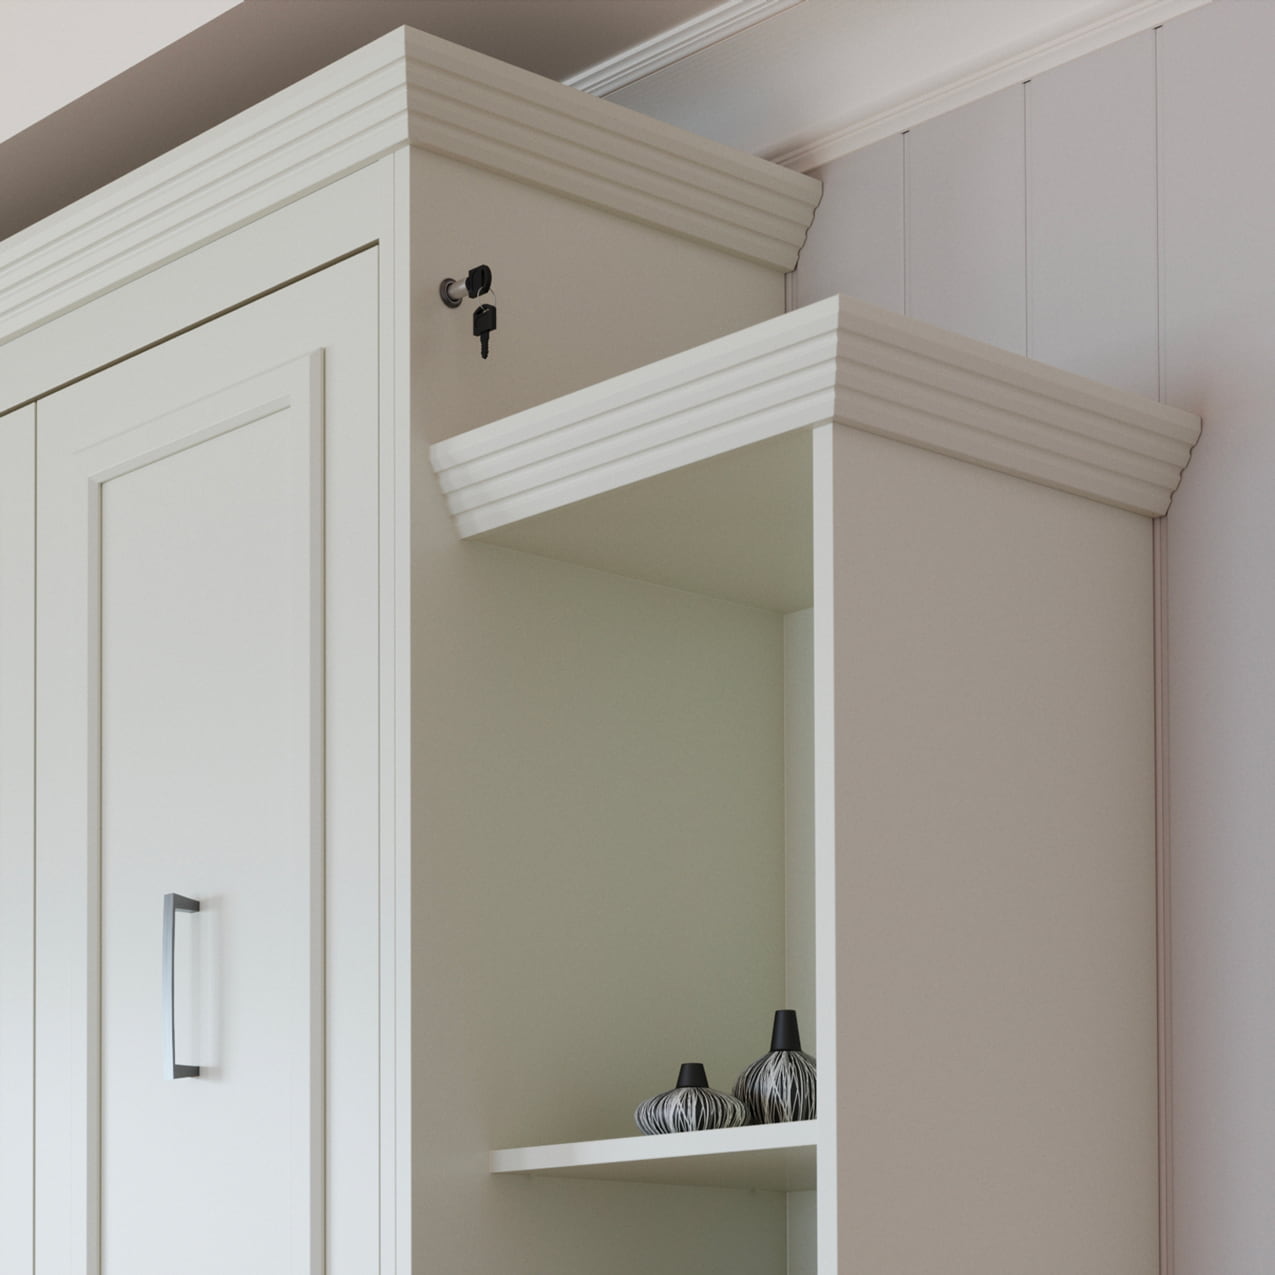 close up of the aegis queen murphy bed cabinet lock and top moldings hidden bed hide away hide-a-way fold out pull down diy murphy bed kit